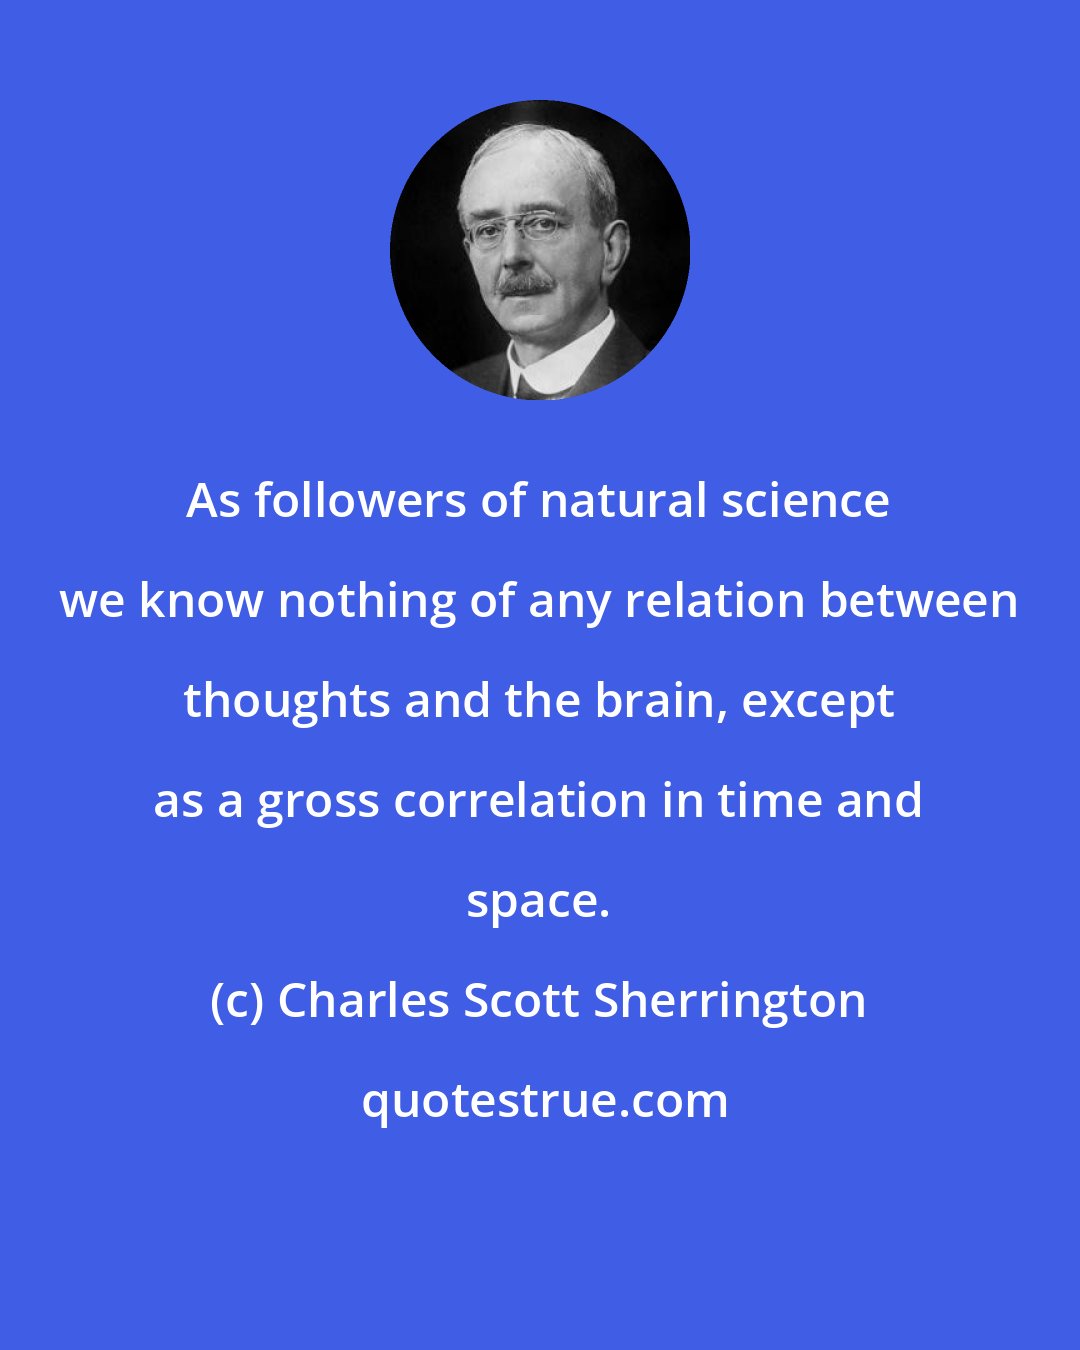 Charles Scott Sherrington: As followers of natural science we know nothing of any relation between thoughts and the brain, except as a gross correlation in time and space.